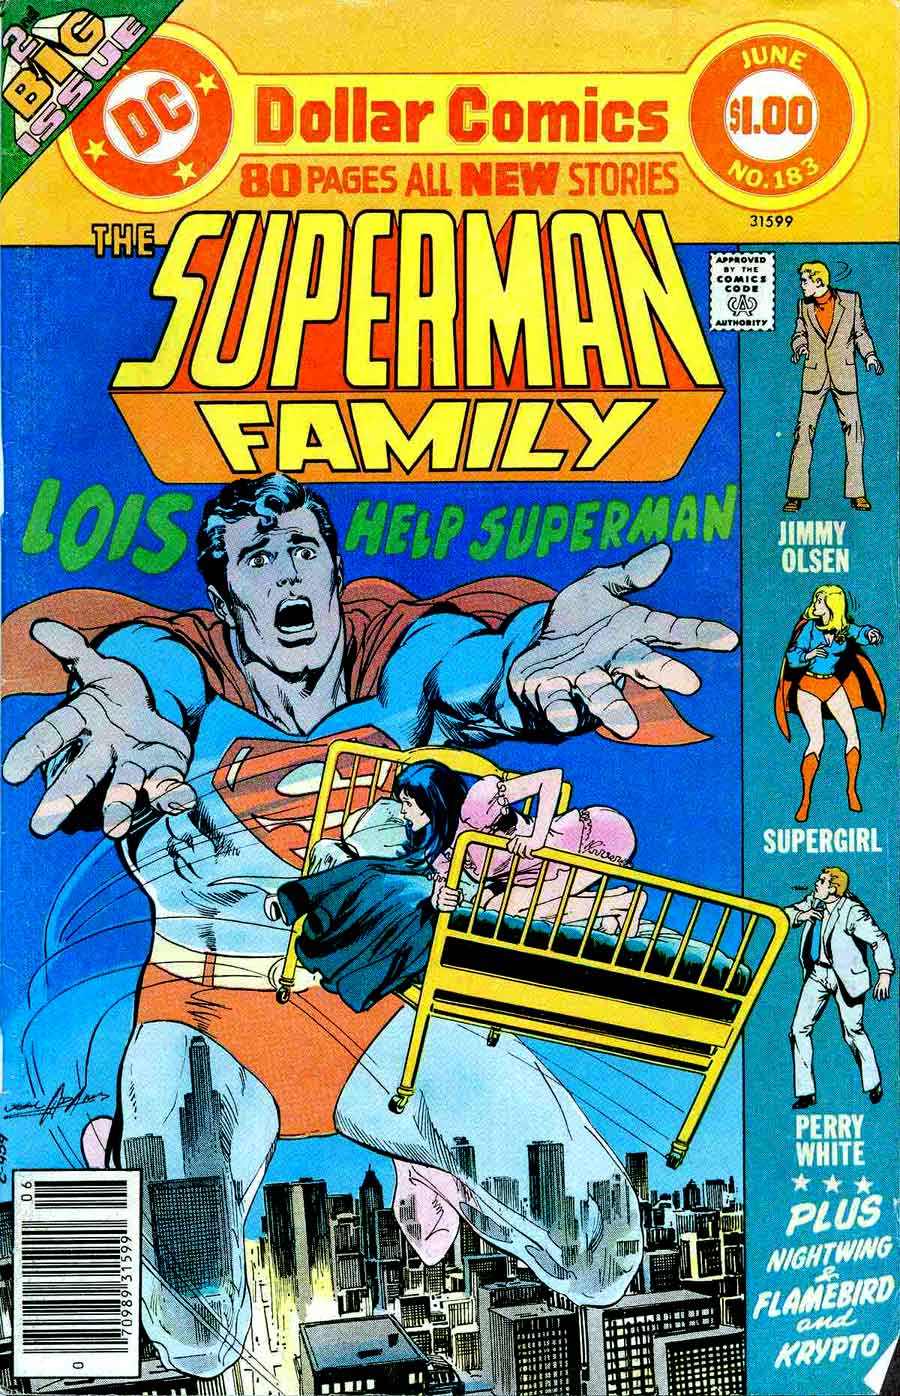 Superman Family #183 comic book cover by Neal Adams circa 1970s